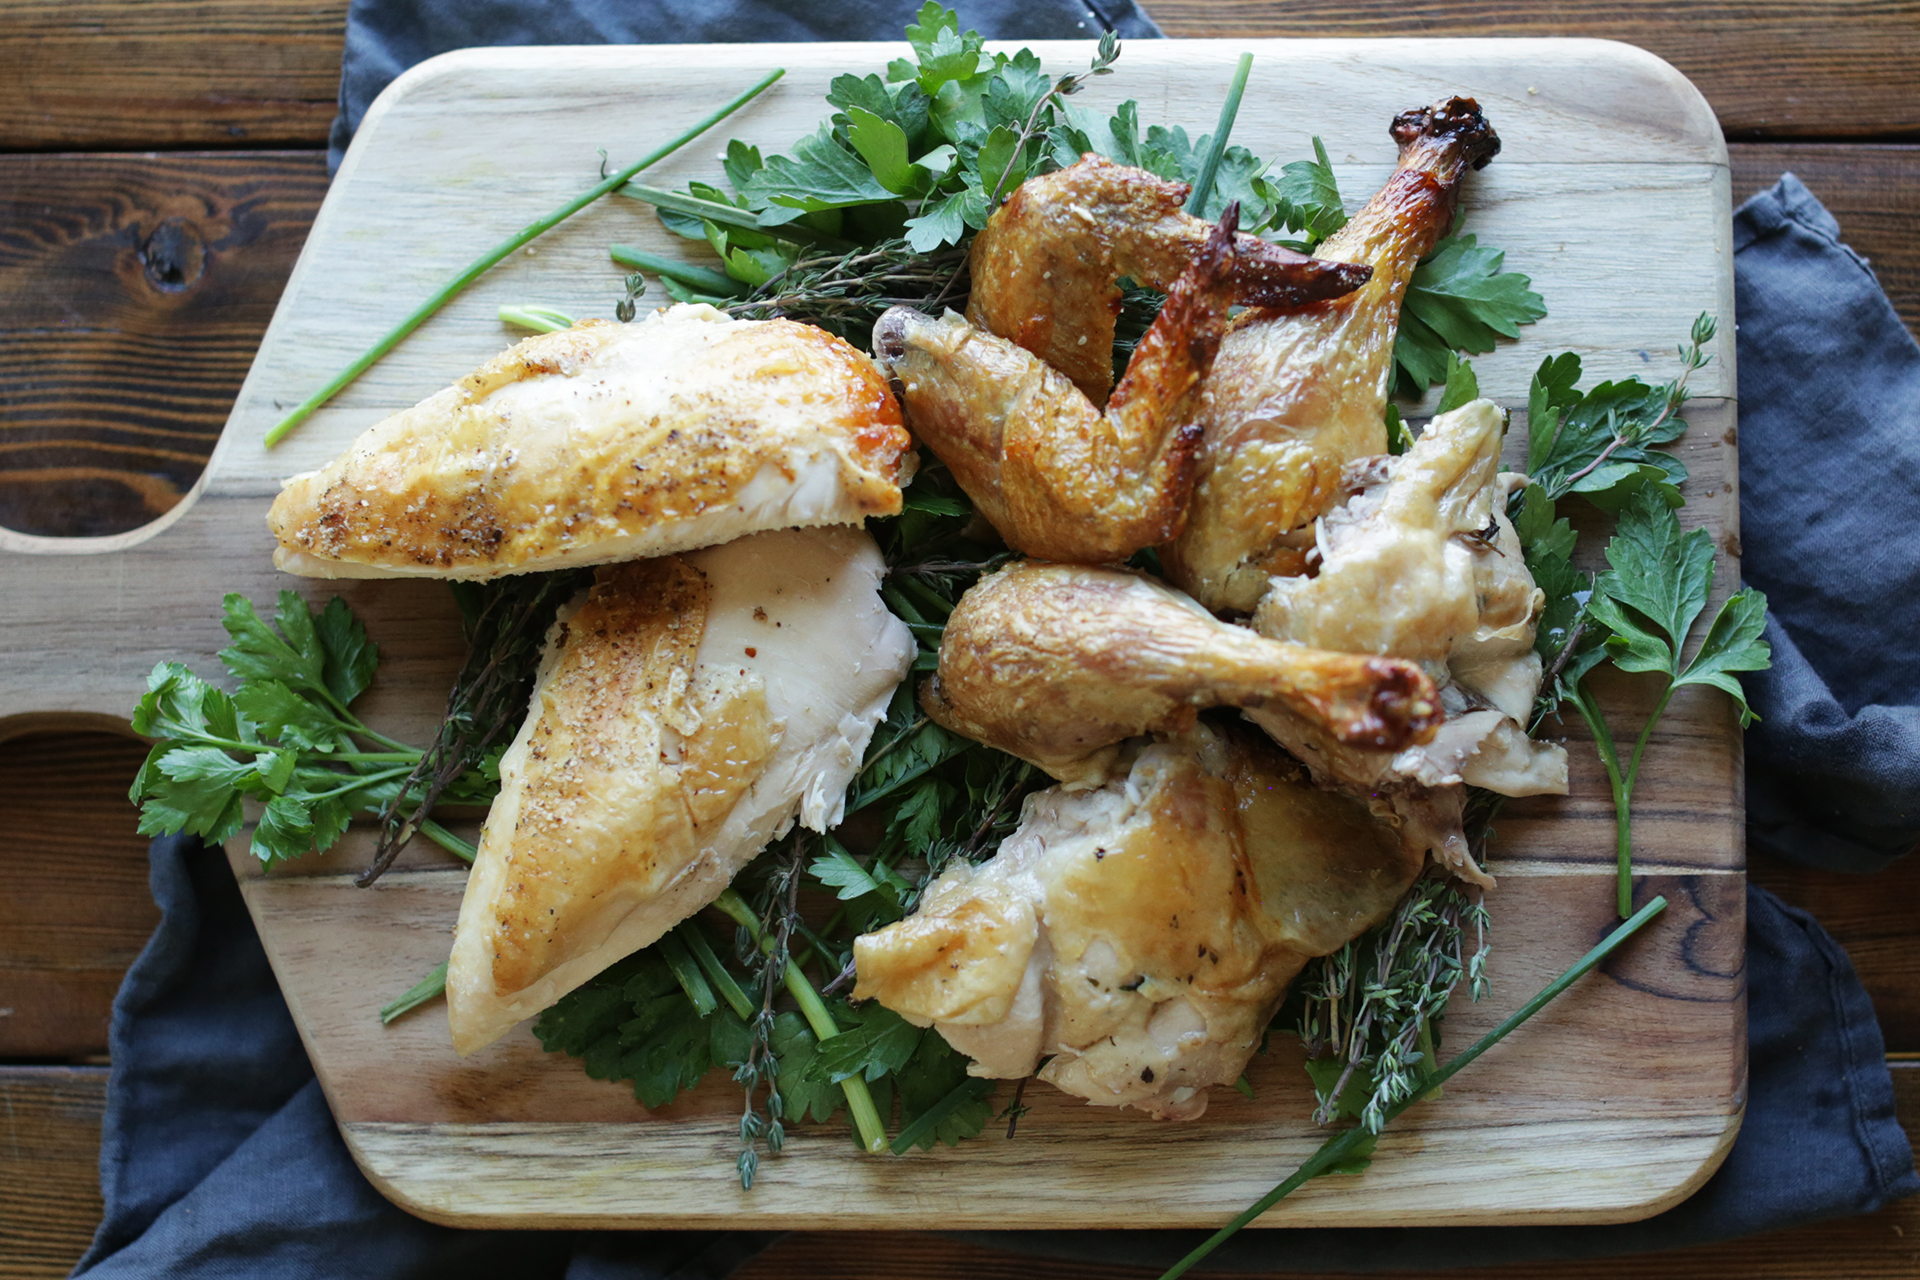 How To: Truss, Roast and Carve a Whole Chicken